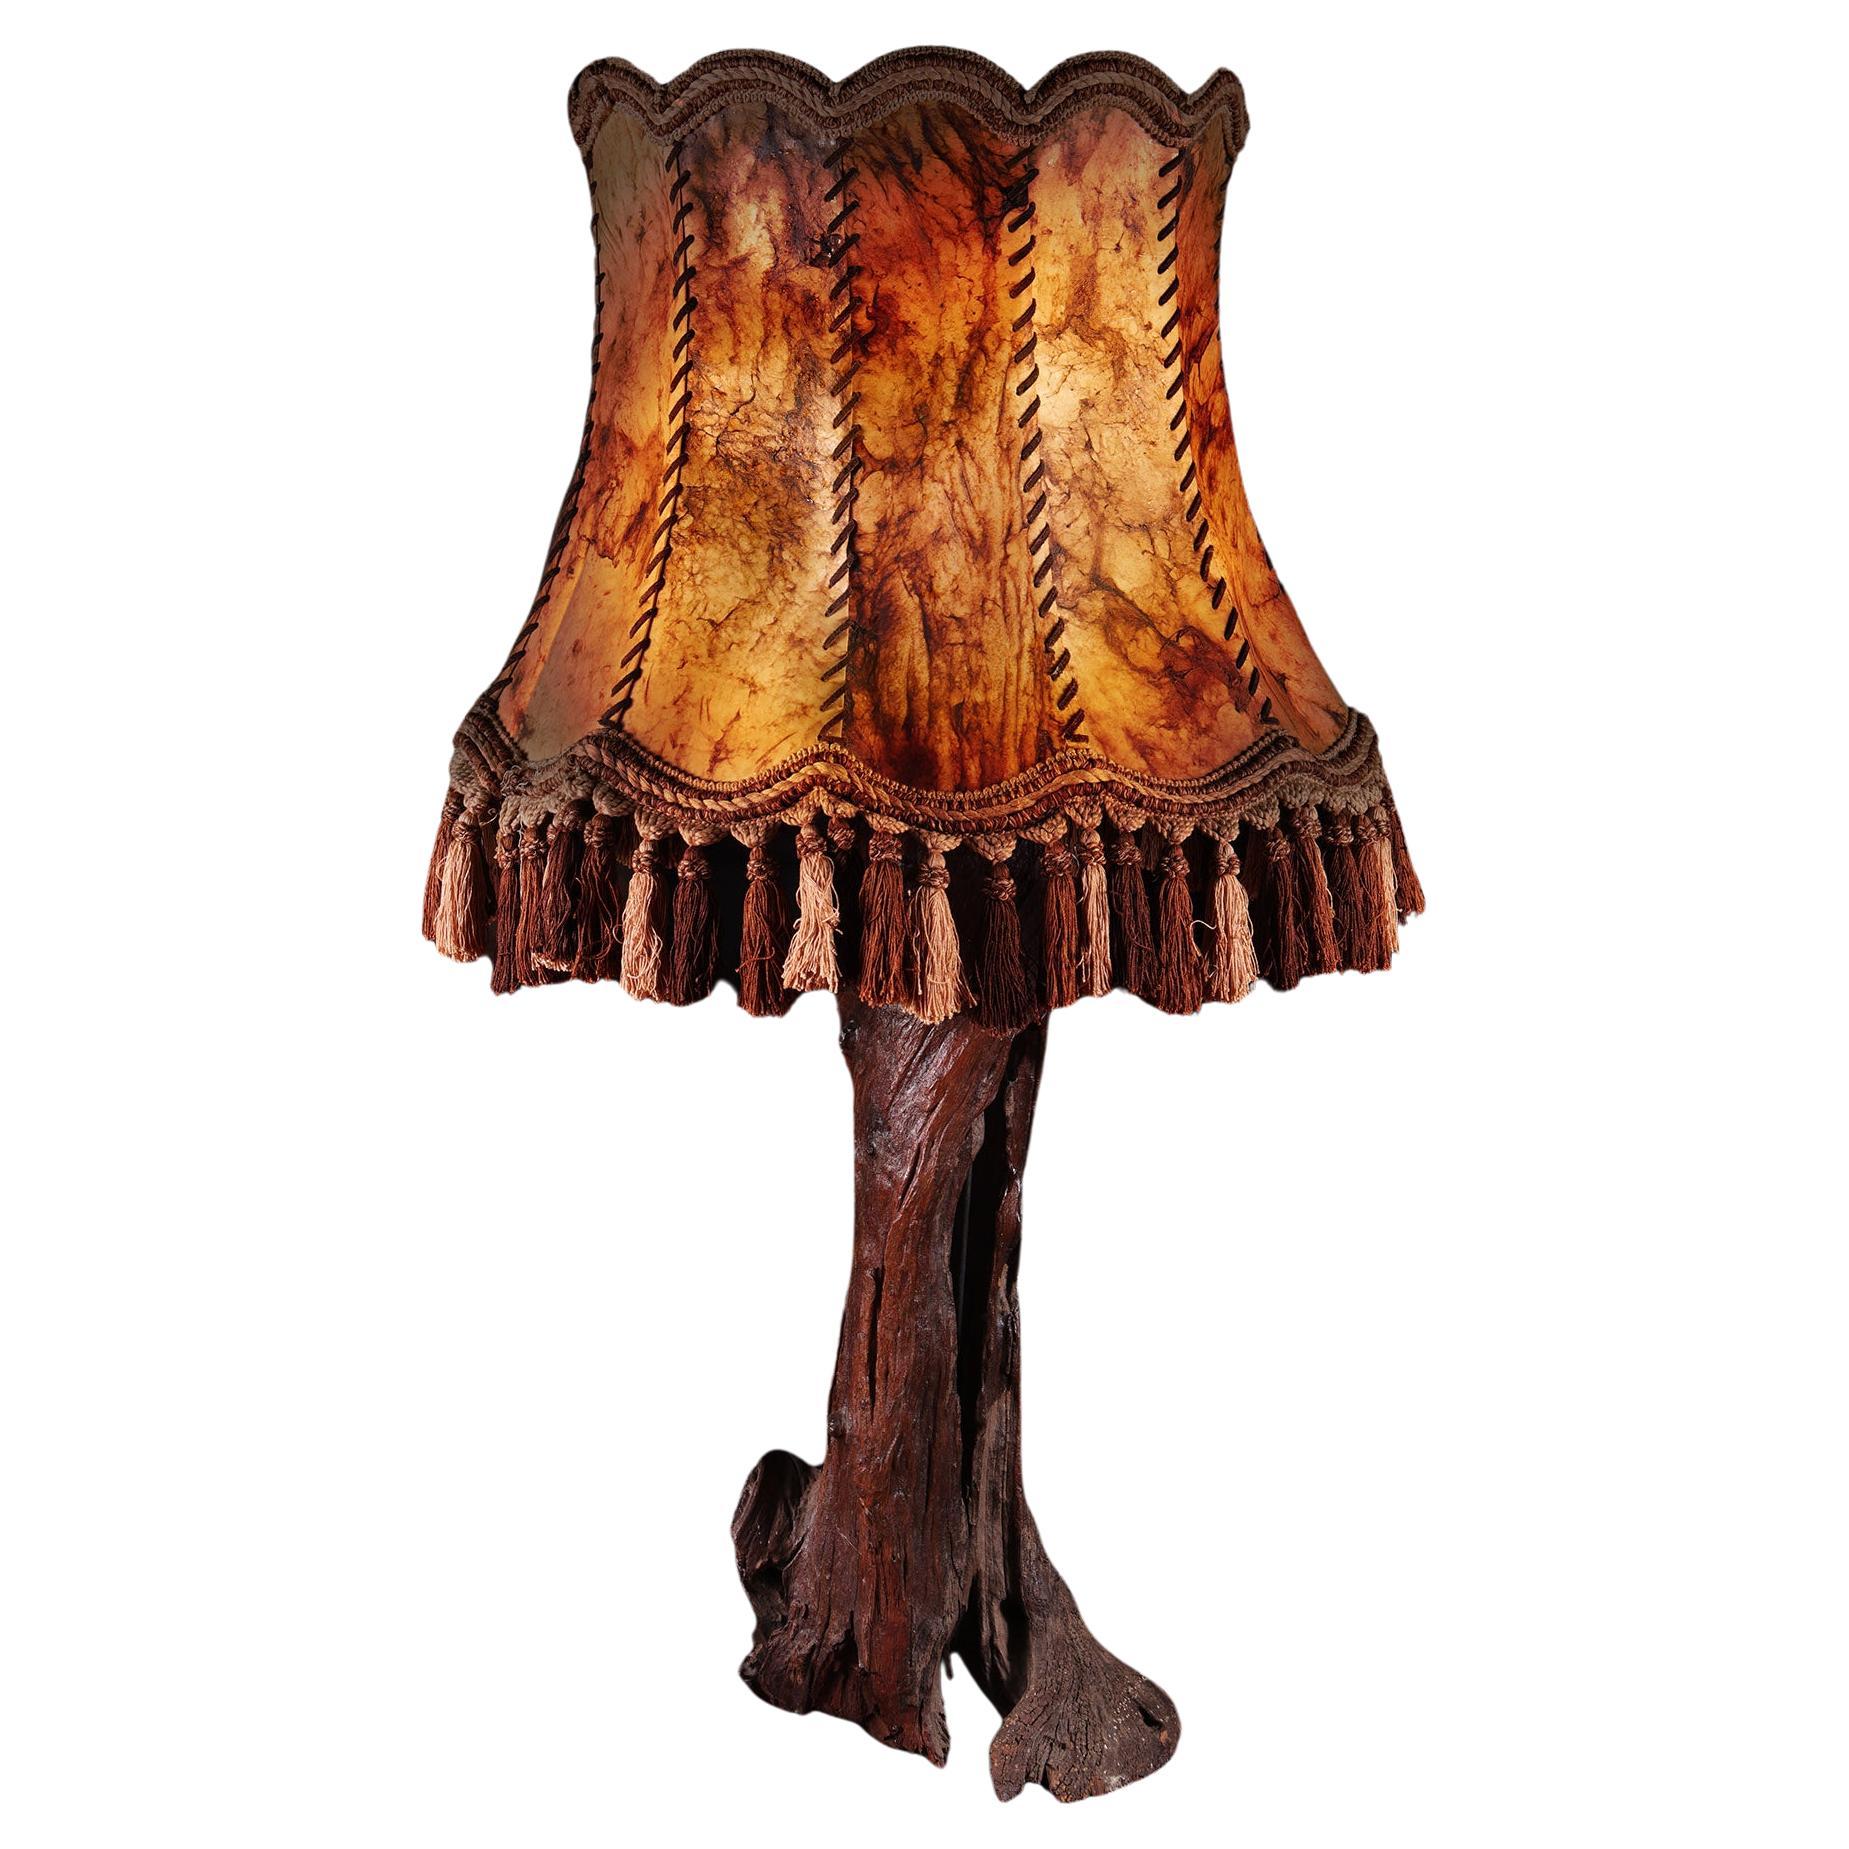 Naturalistic Vine Wood Table Lamp and Parchment Stitched Shade 